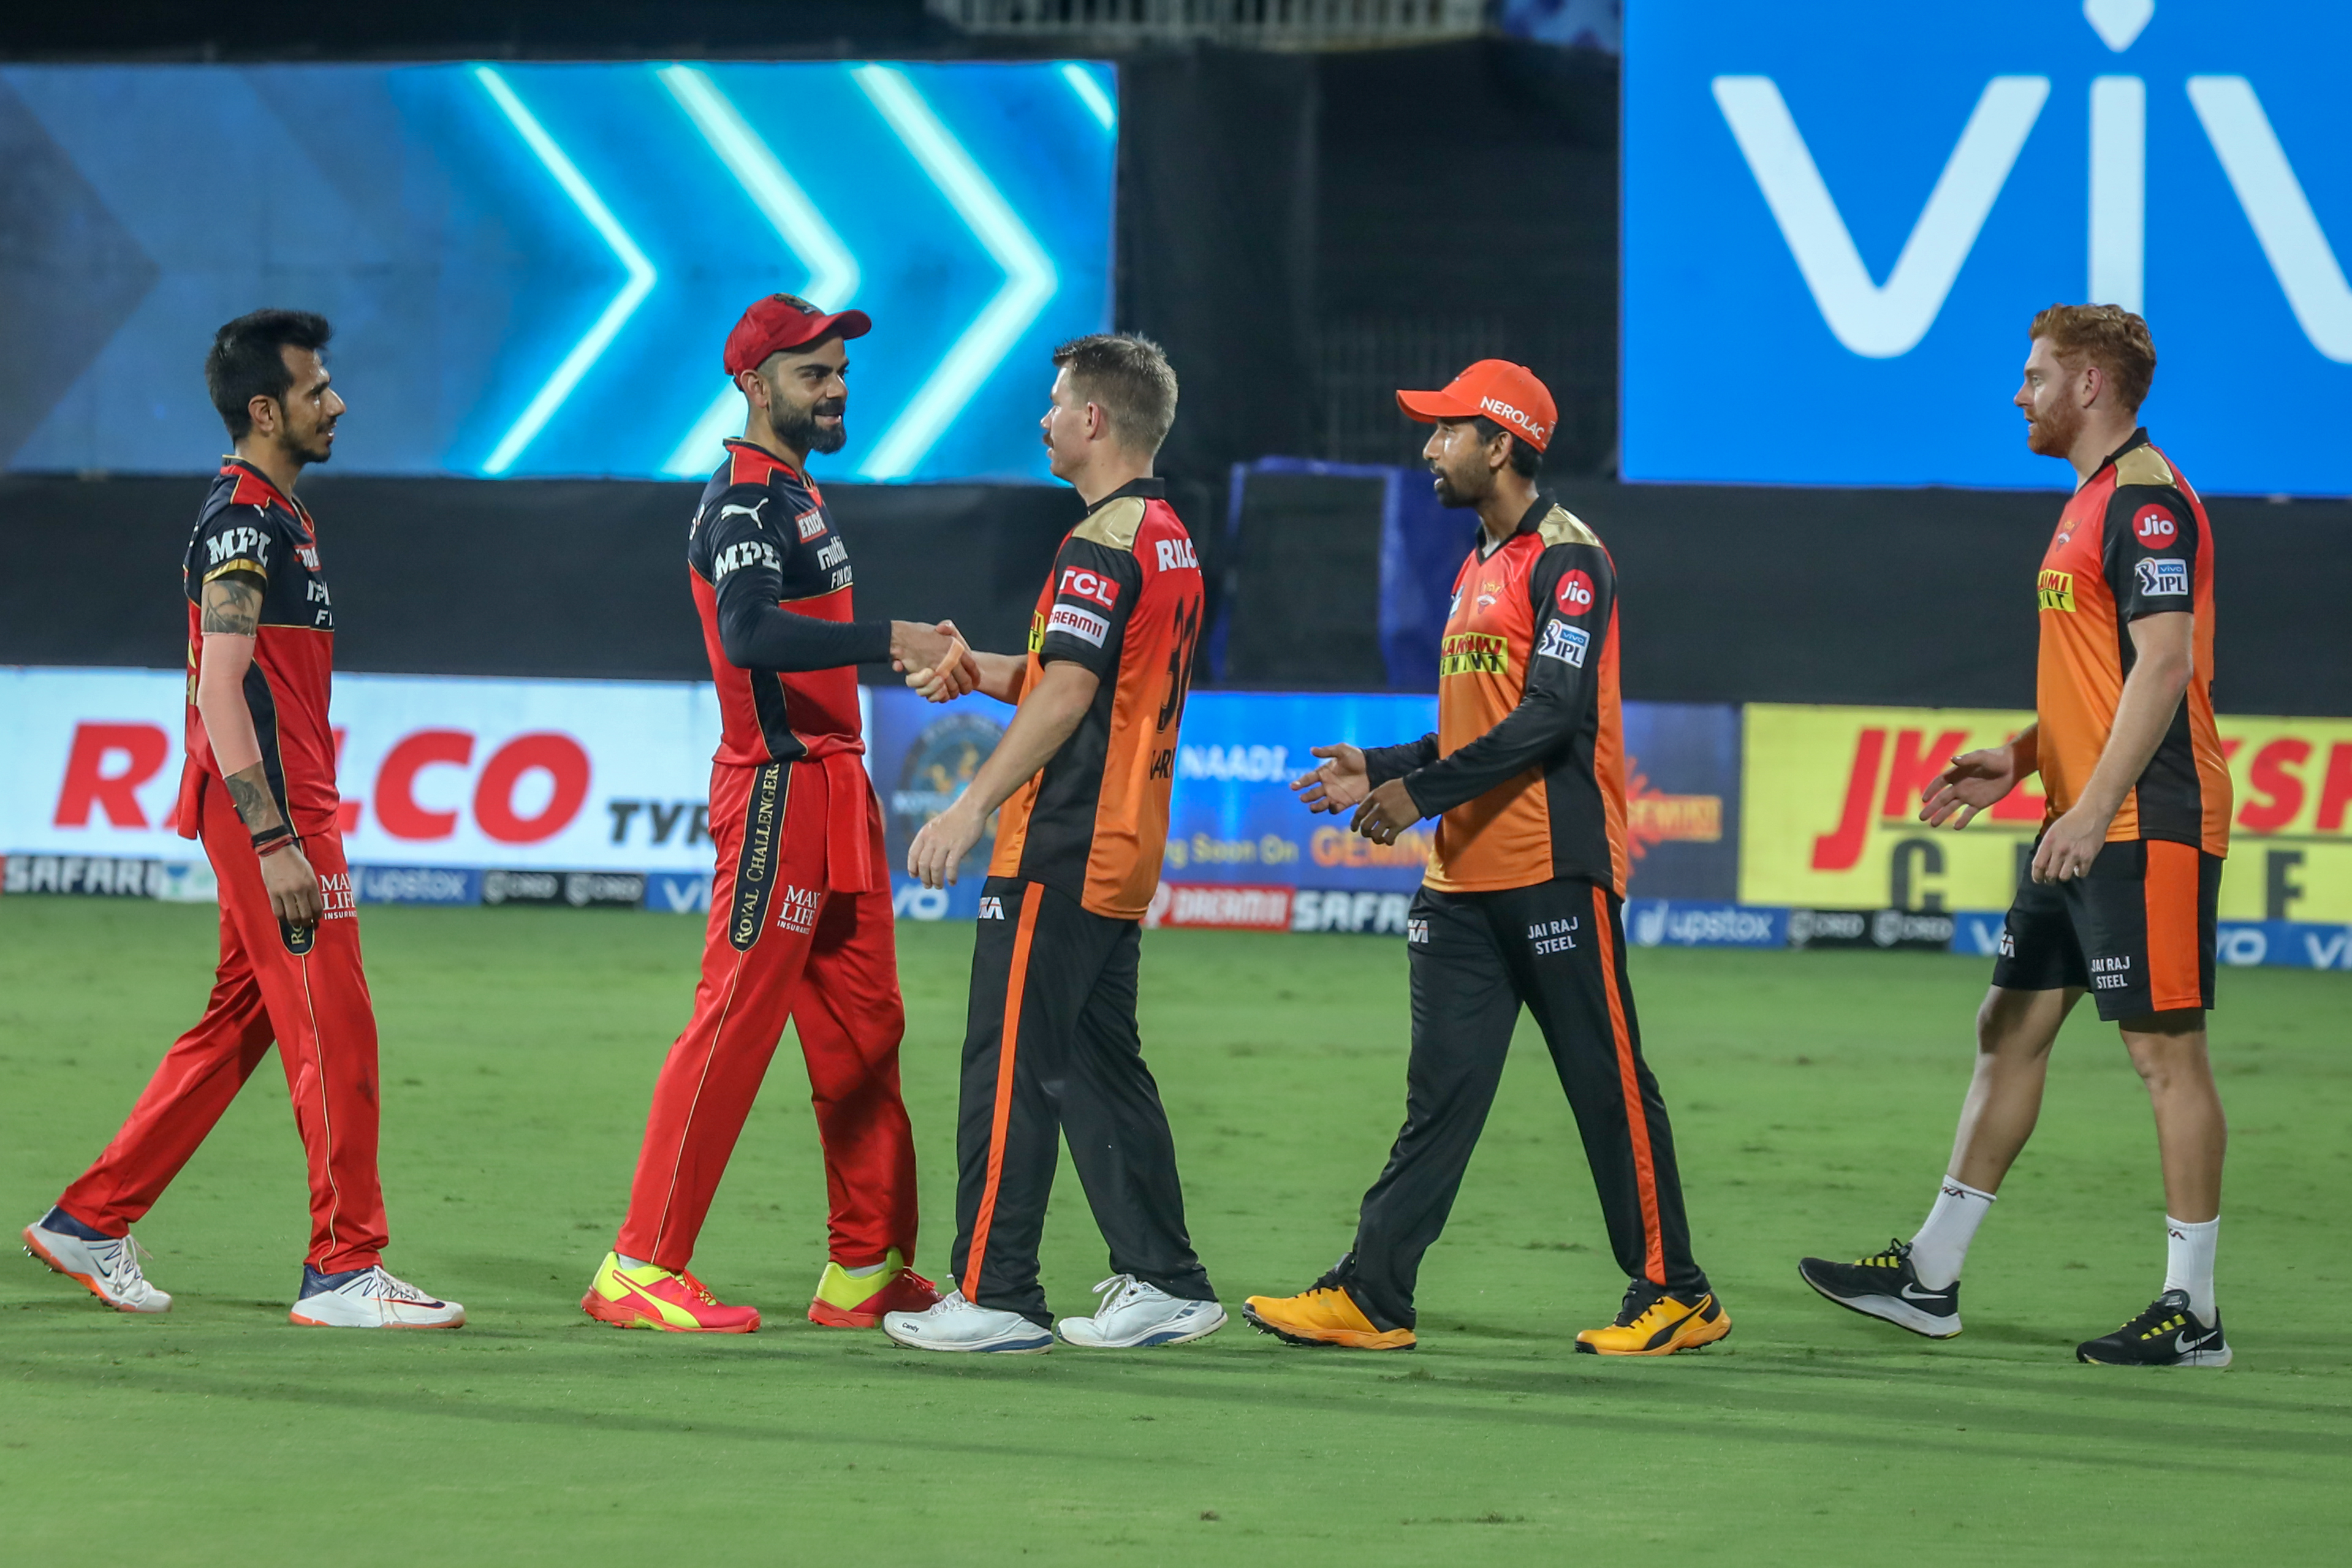 Failure of the middle-order cost SRH the IPL 14 games against RCB | IPL/BCCI